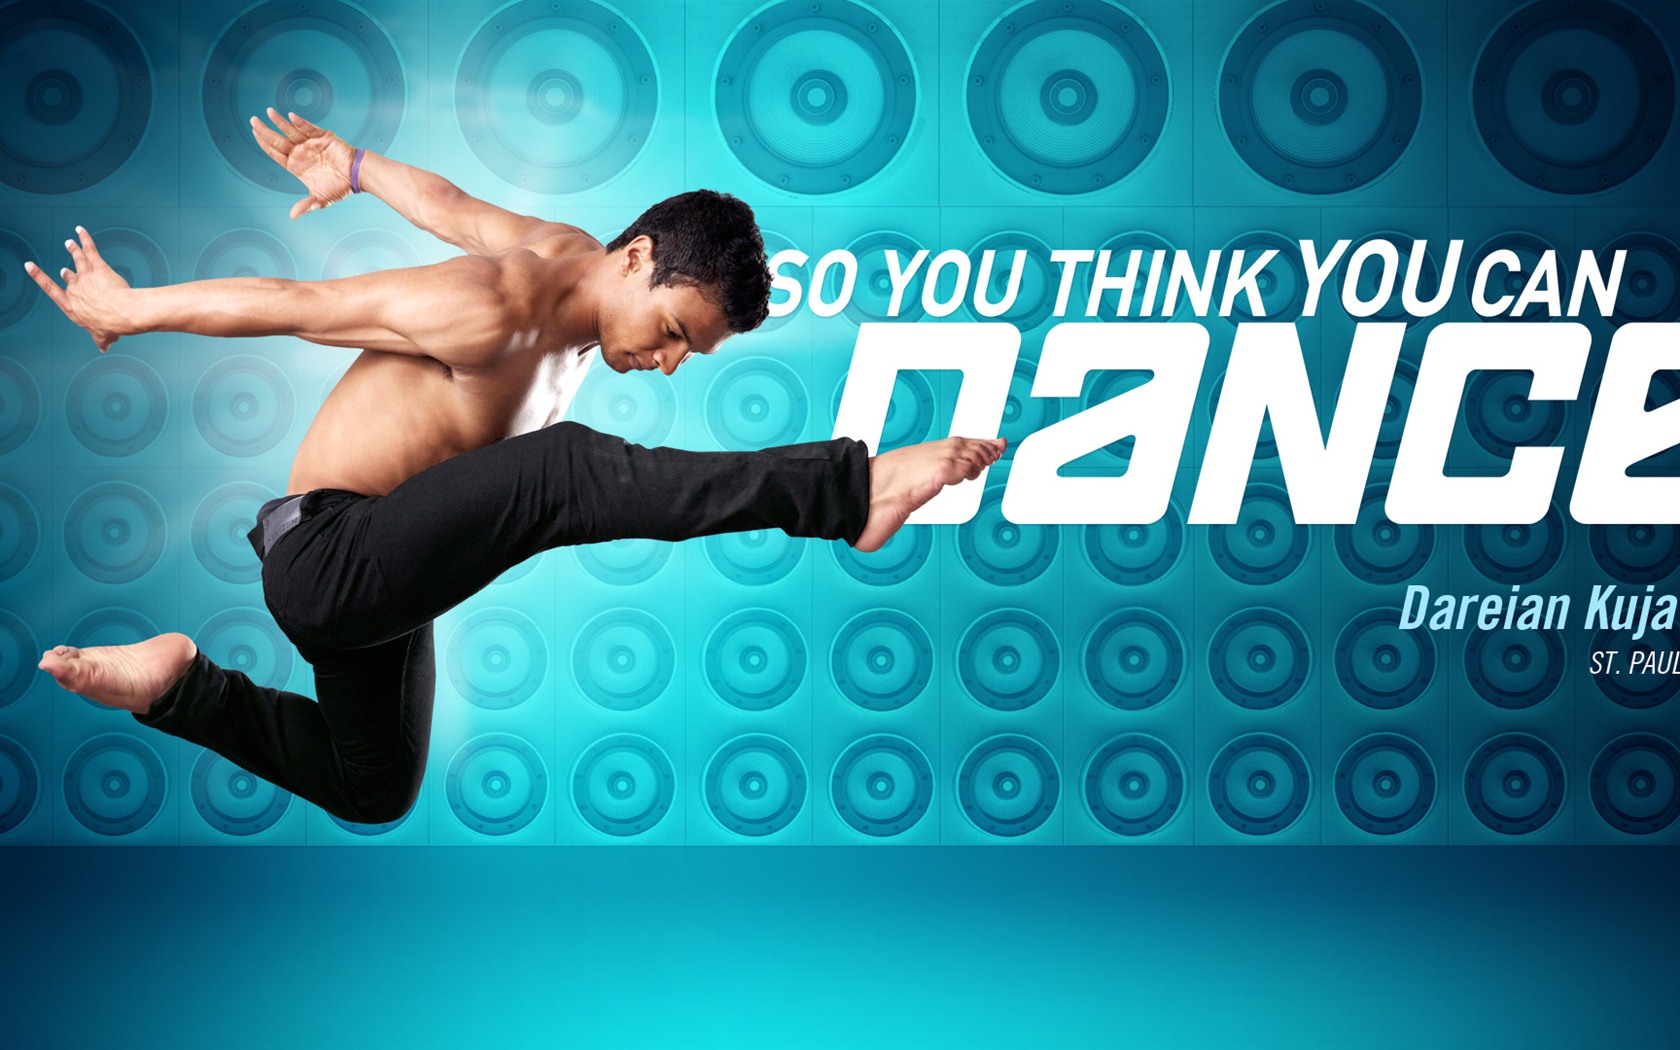 So You Think You Can Dance 舞林争霸 2012高清壁纸11 - 1680x1050